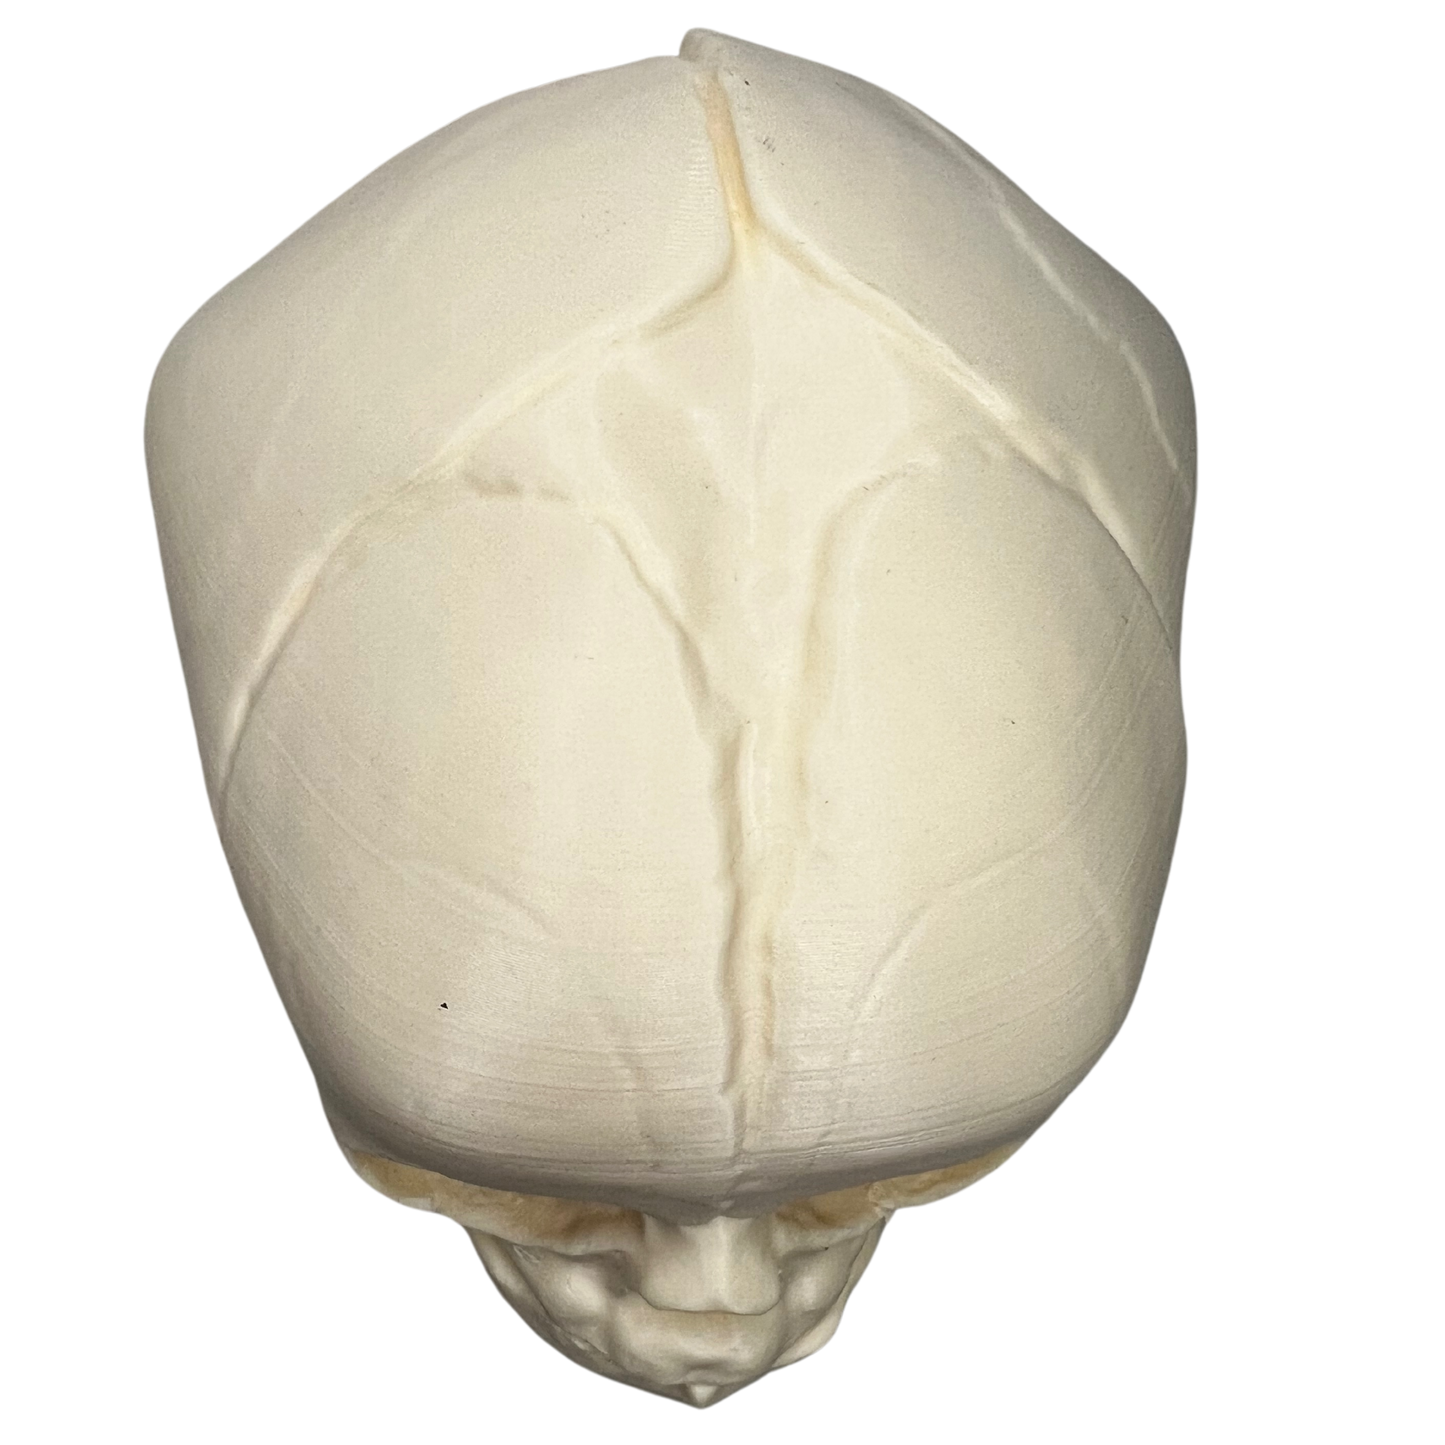 View of full-term fetal skull model from the top includes well-defined suture lines for prenatal education purposes